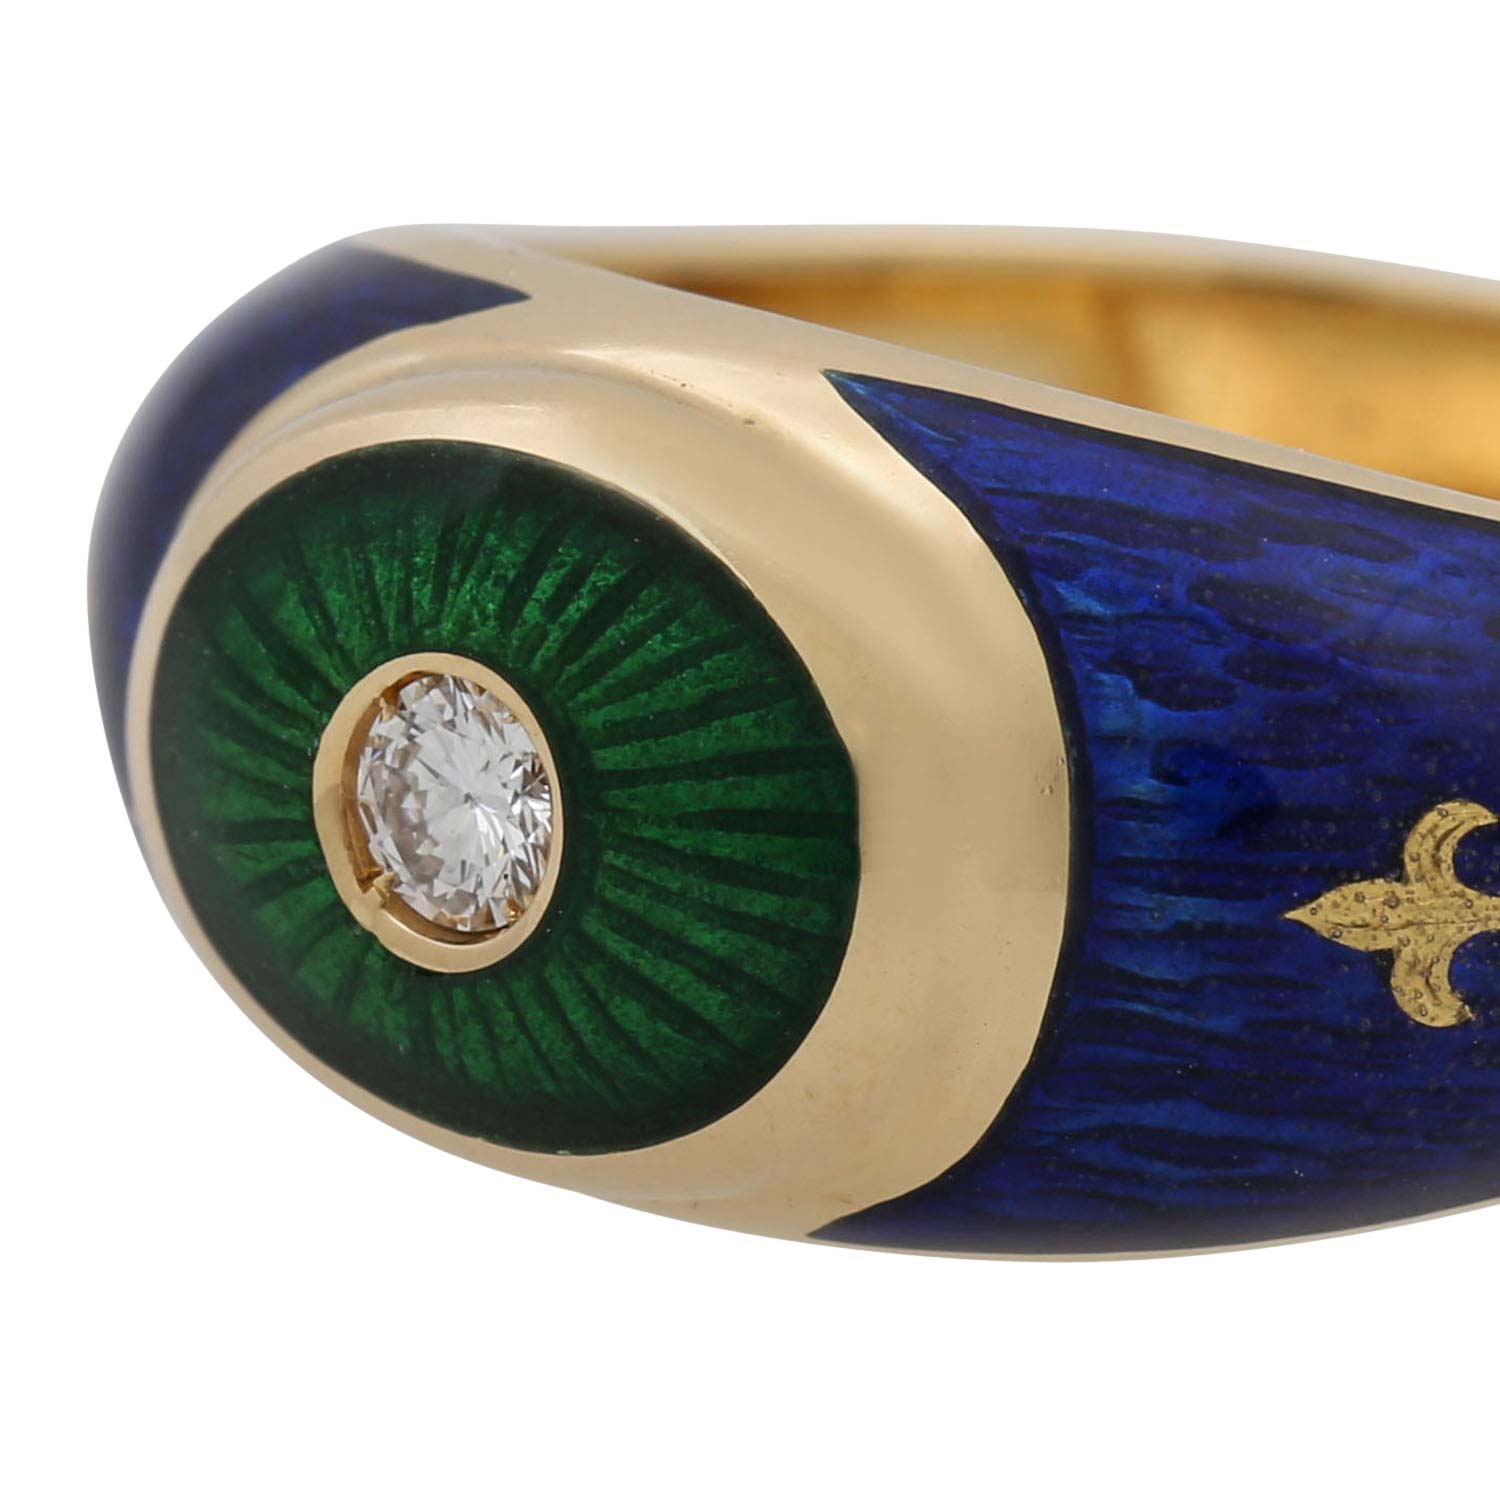 FABERGÉ by VICTOR MAYER Ring - Image 5 of 5